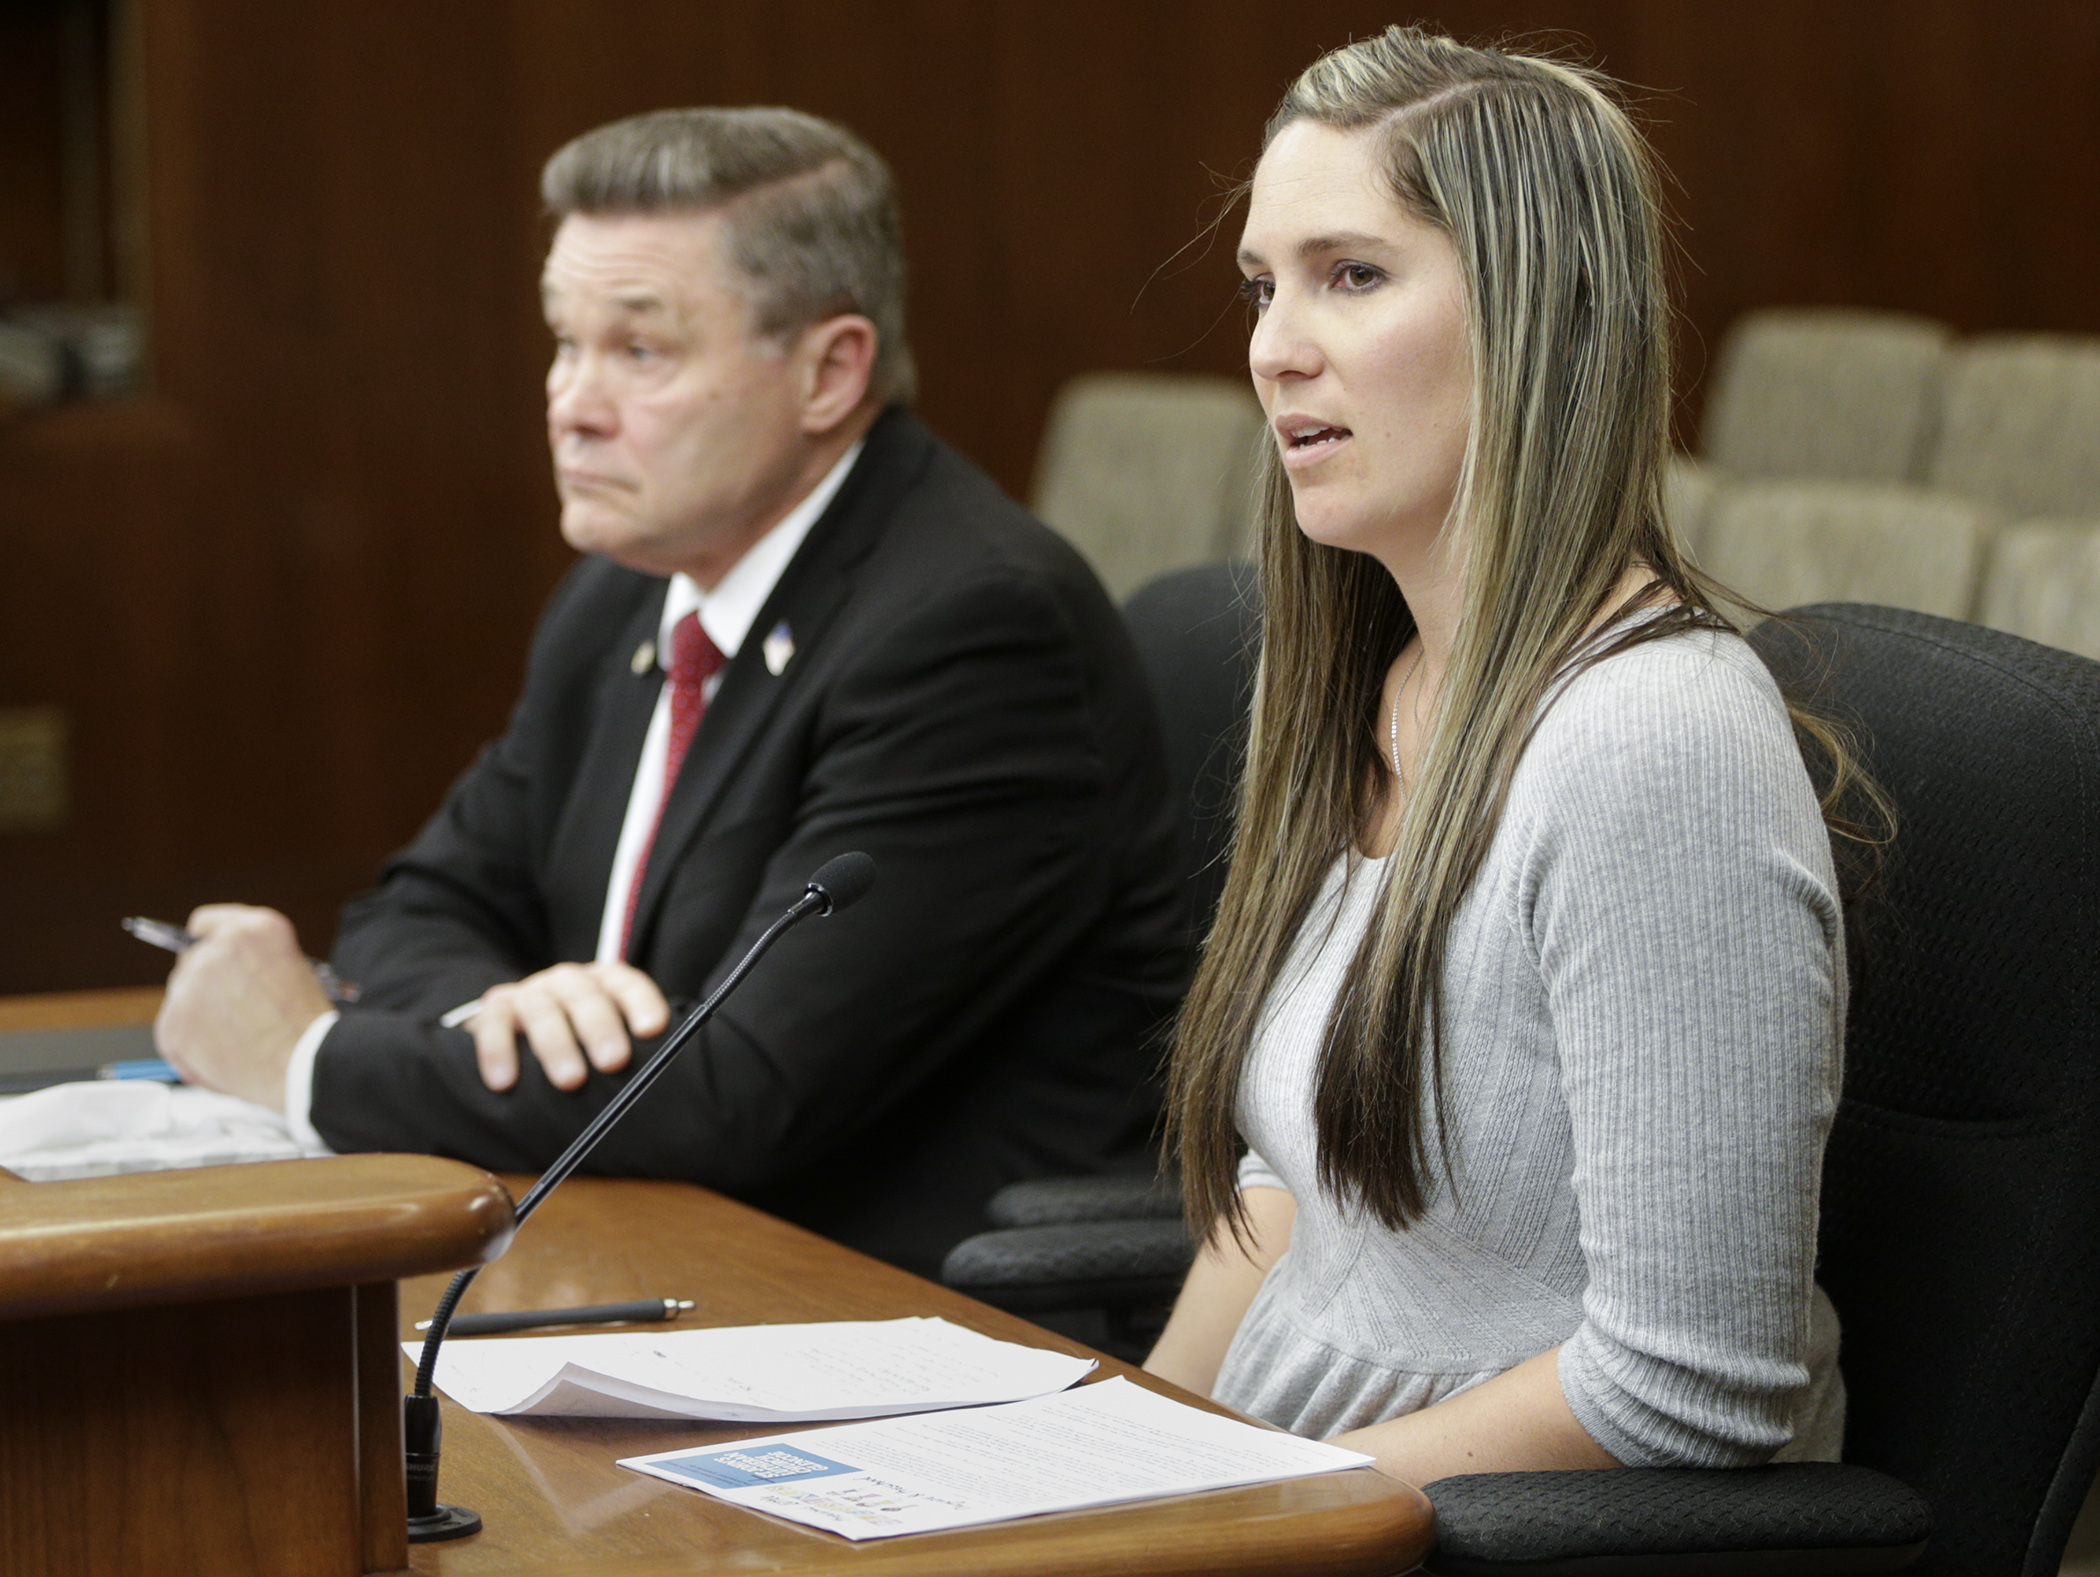 Katie Rickert, director of Precious Little Blessings Daycare, testifies on HF2834, sponsored by Rep. Glenn Gruenhagen, left, which would provide a property tax exemption for some daycare facilities. Photo by Paul Battaglia